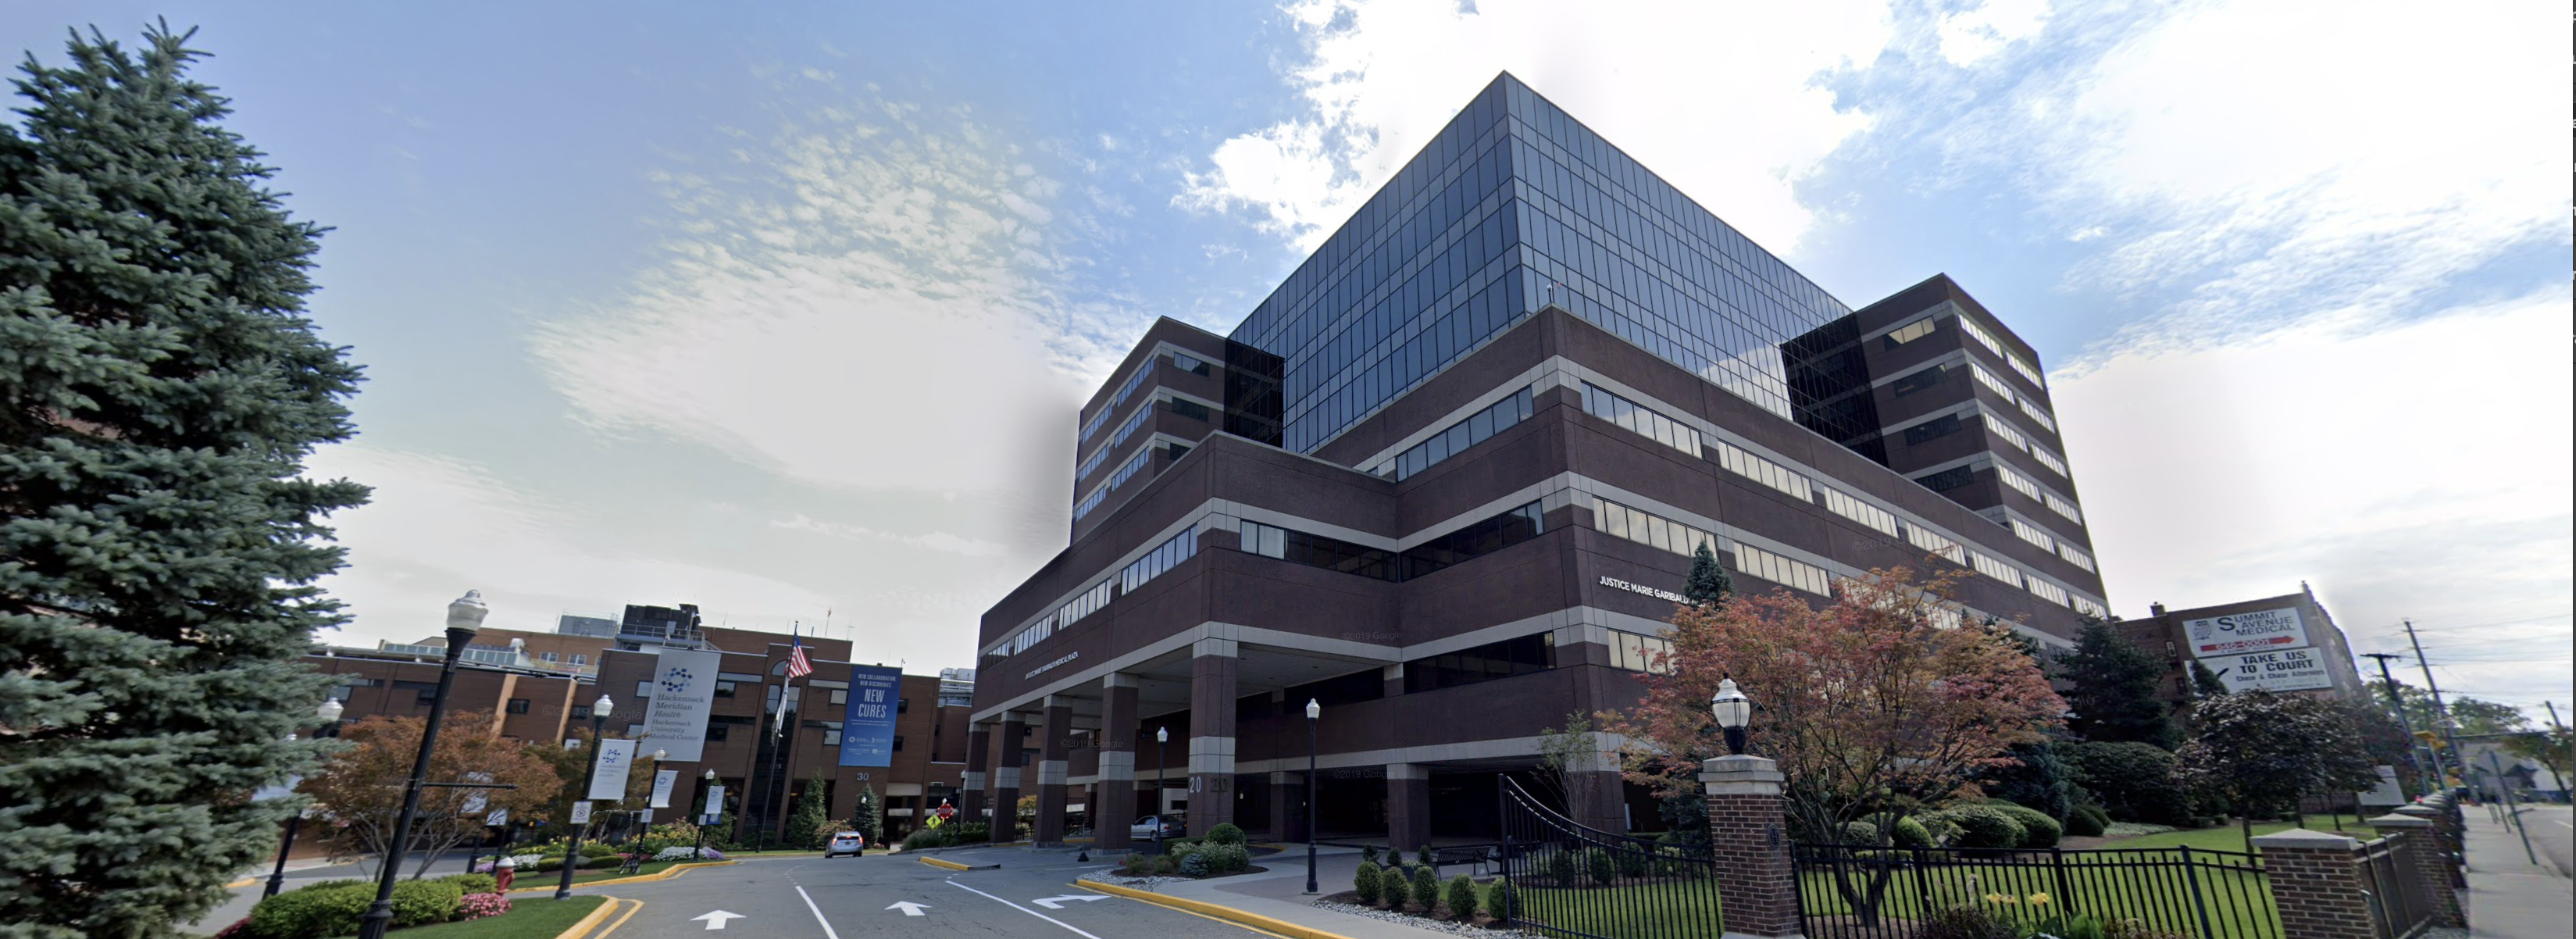 Hackensack office building - New Jersey Brain and Spine - Bergen County, NJ